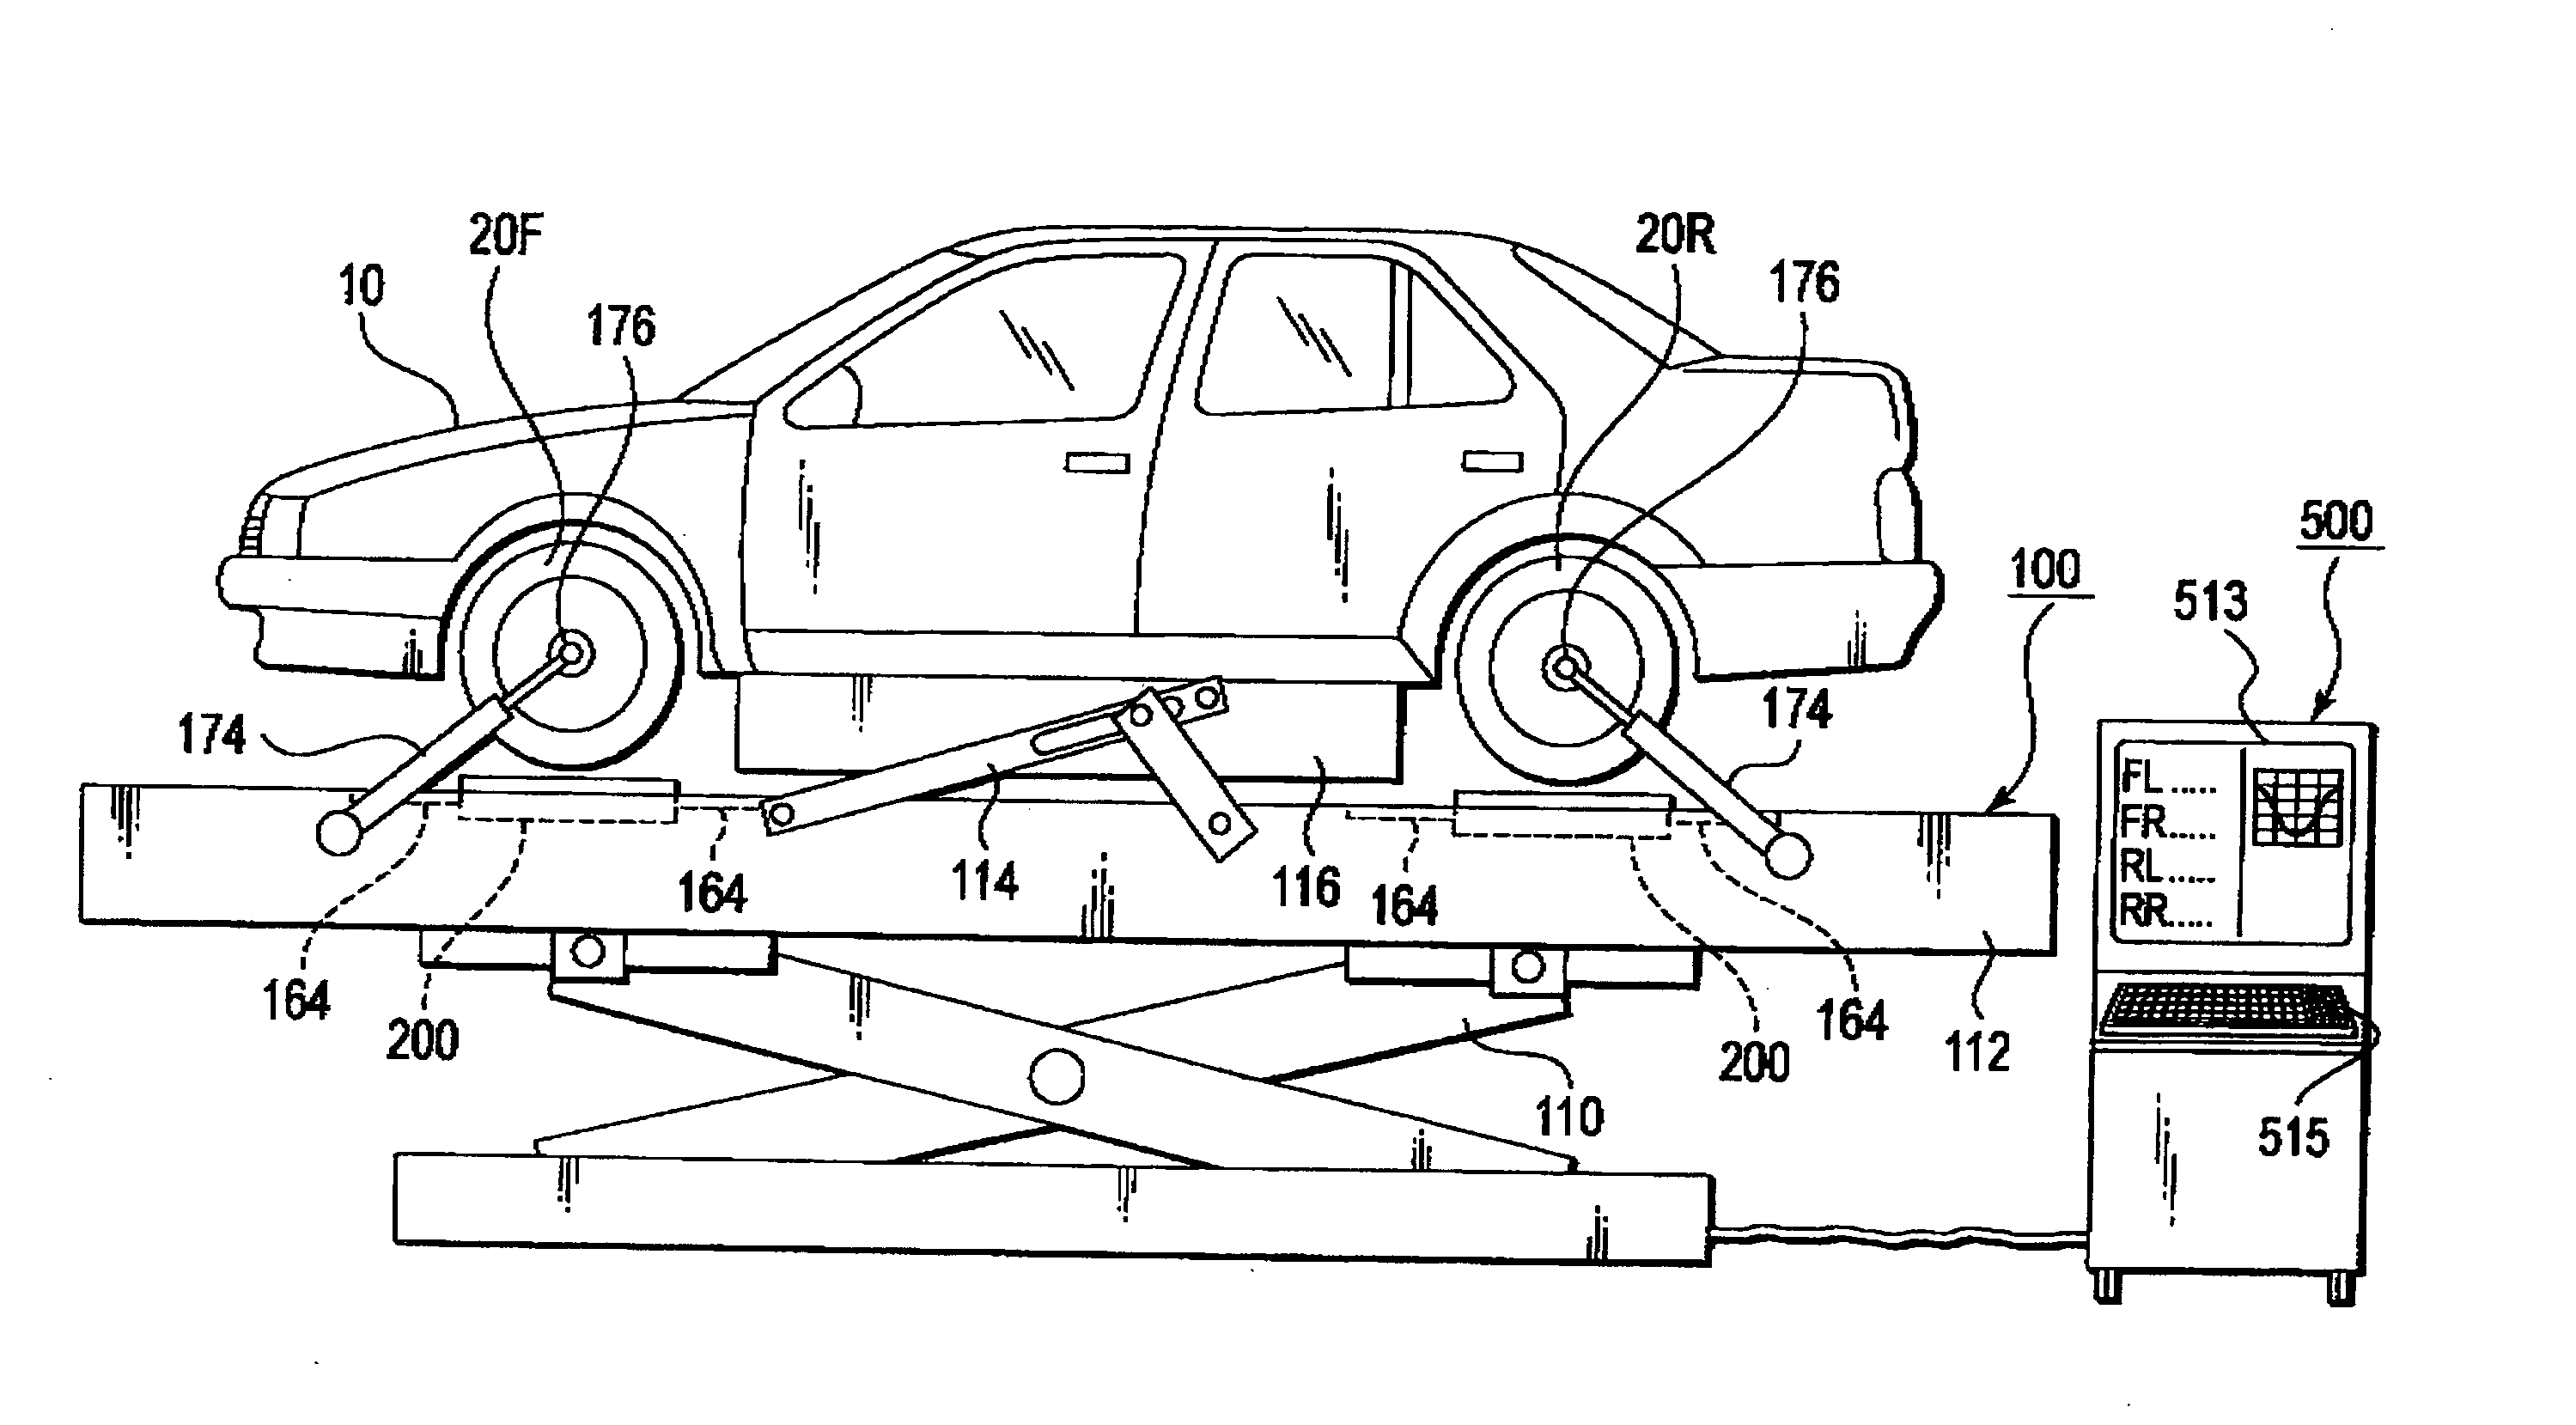 Wheel Allignment Angle Measuring Apparatus and Wheel Alignment Angle Measuring Method